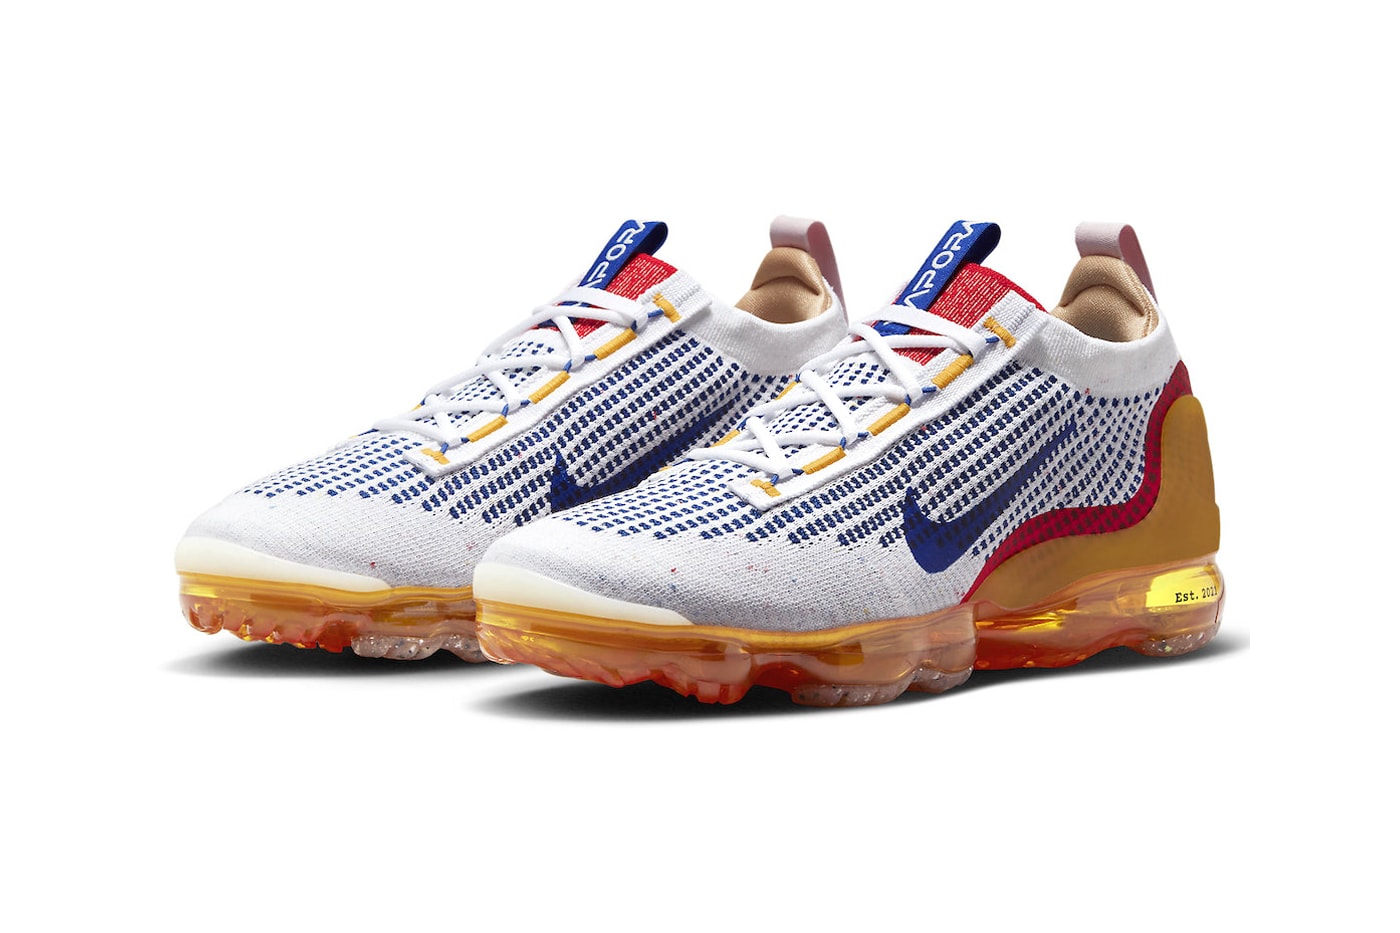 Nike Air Vapormax 2021 Air Pressure Spotlights the Father of Nike Air frank rudy nasa engineer old royal yellow red release info date price